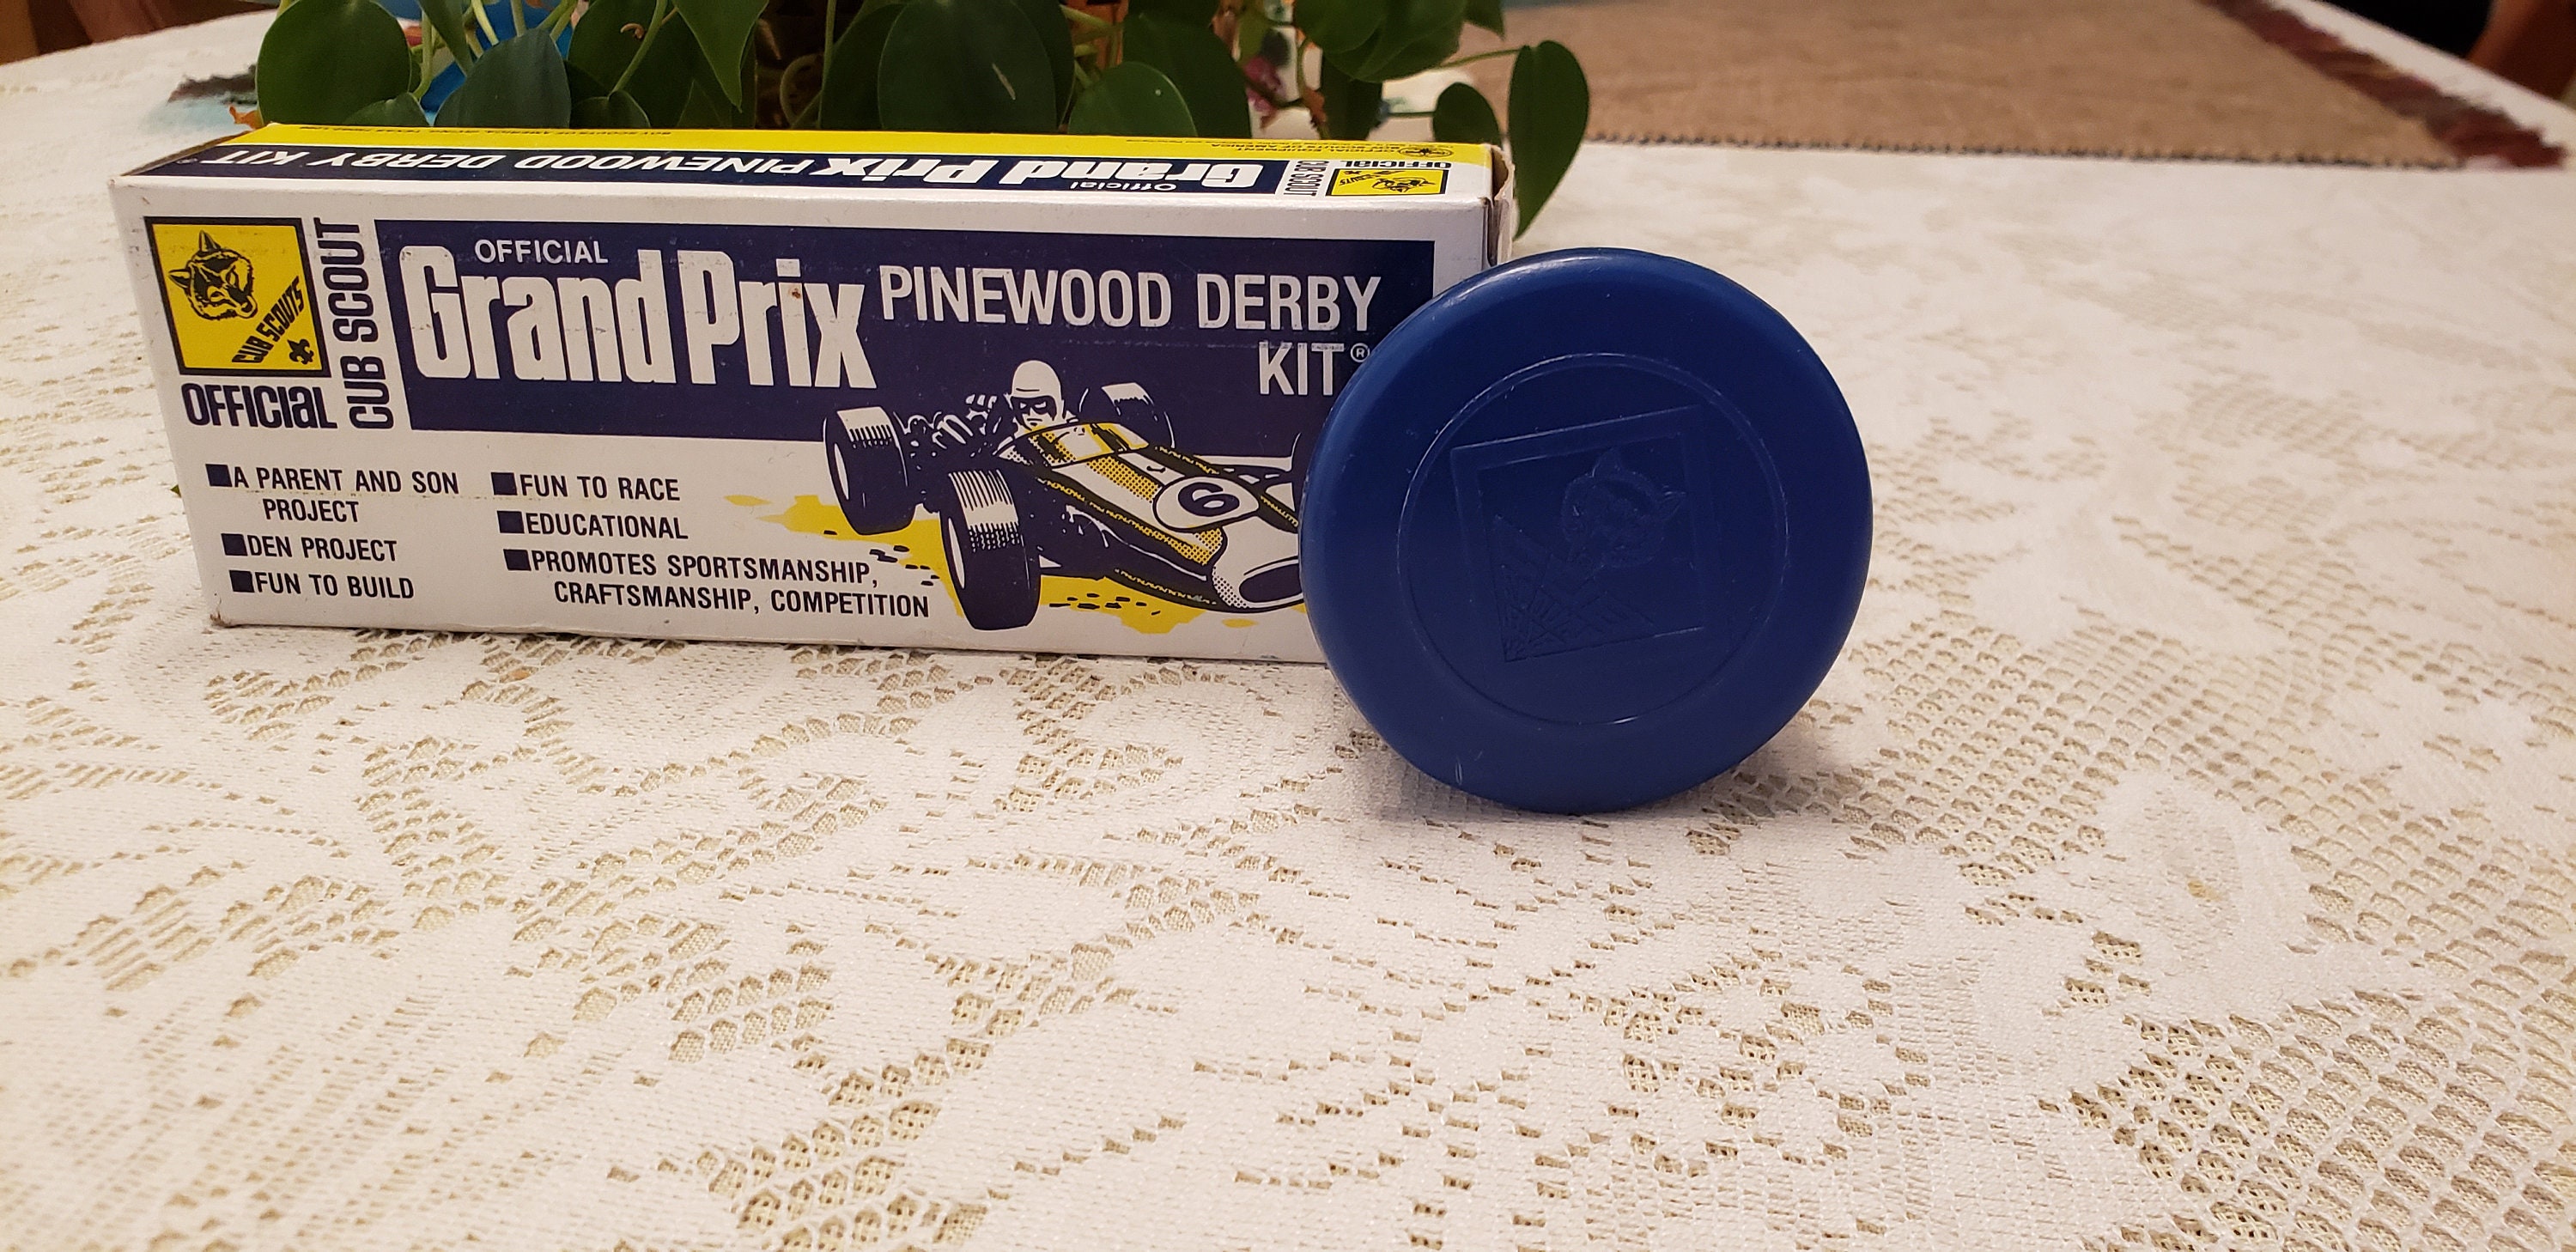 Vintage Cub Scouts Plastic Collapsible Cup and Vintage Pinewood Derby Kit  1970's Still in Box FREE SHIPPING 